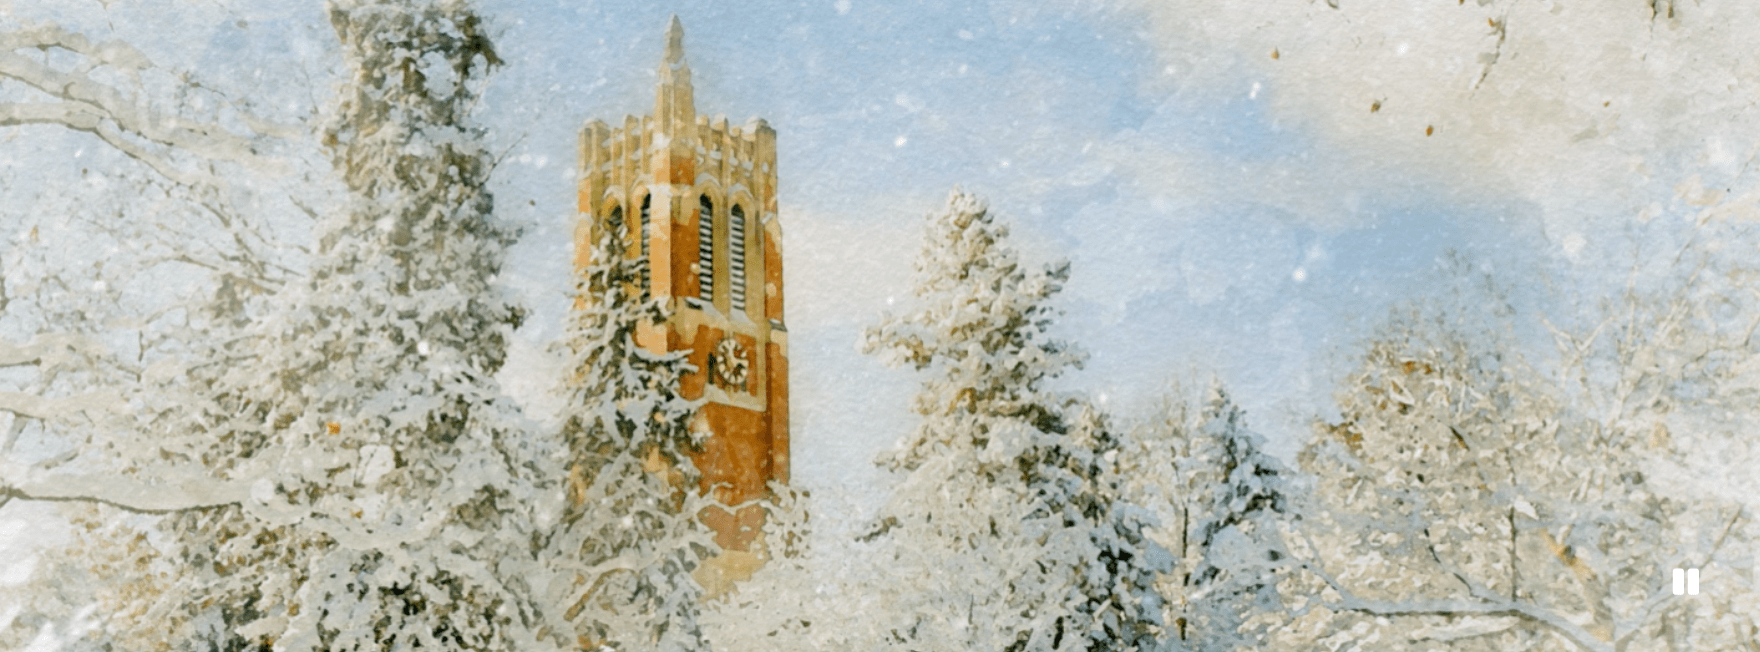 drawing of a snowy scene at Beaumont Tower